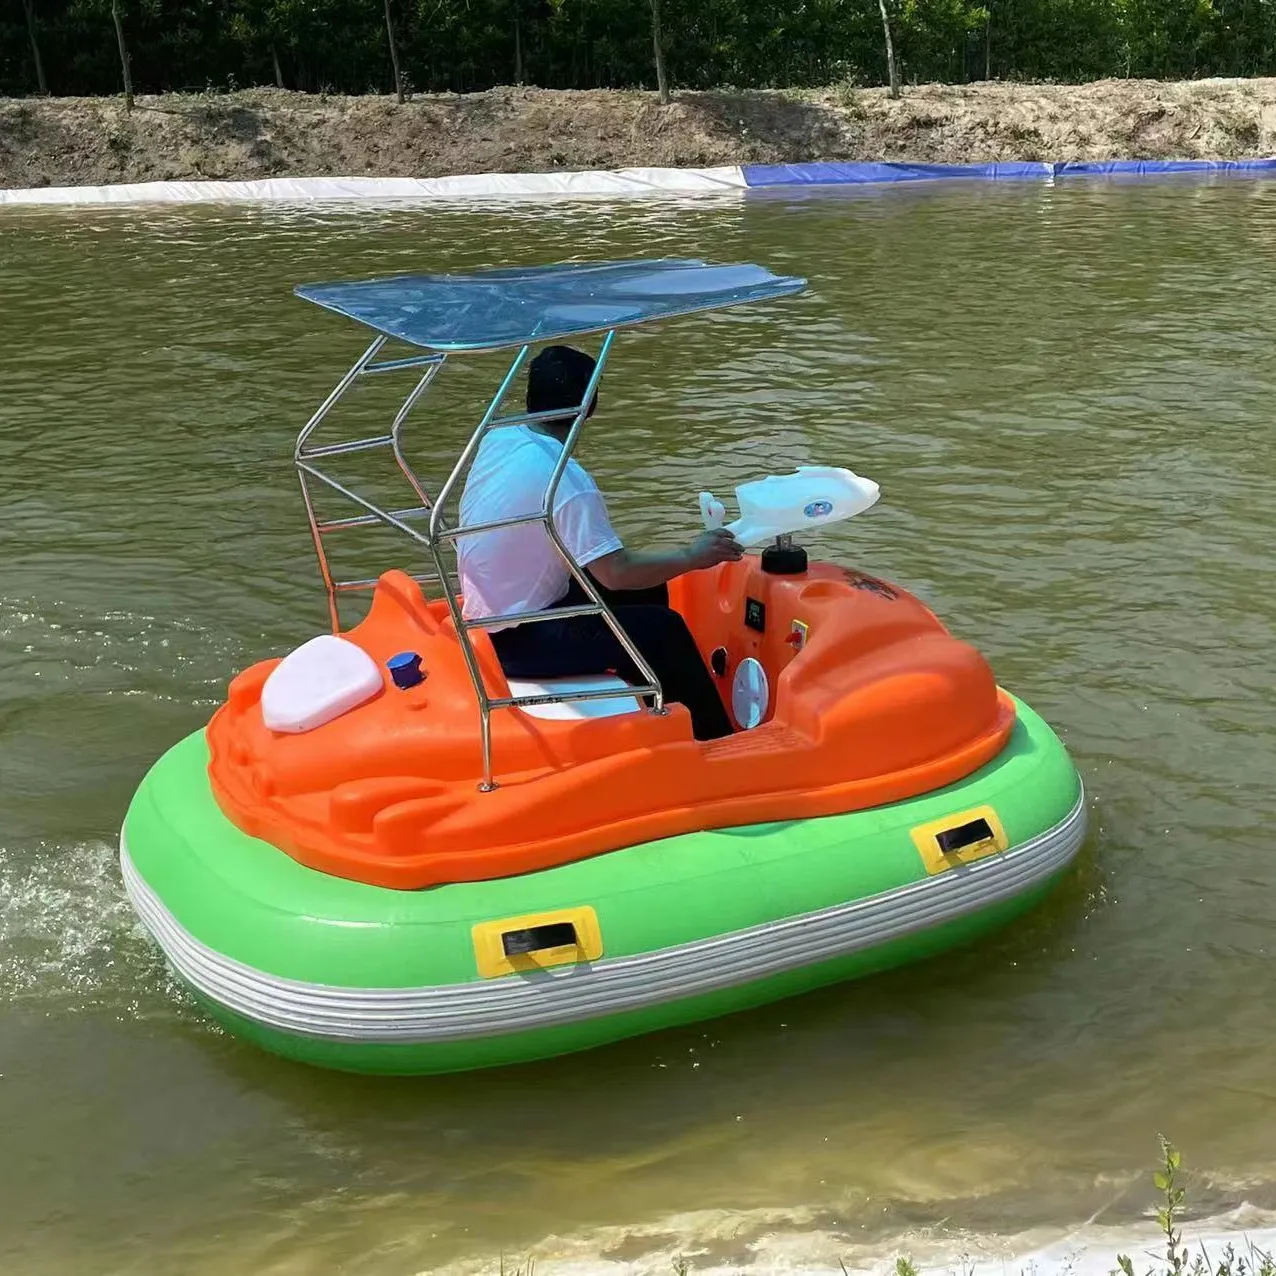 Outdoor Crazy water bumper Car Electric boat water play equipment Water bumper boats for sale